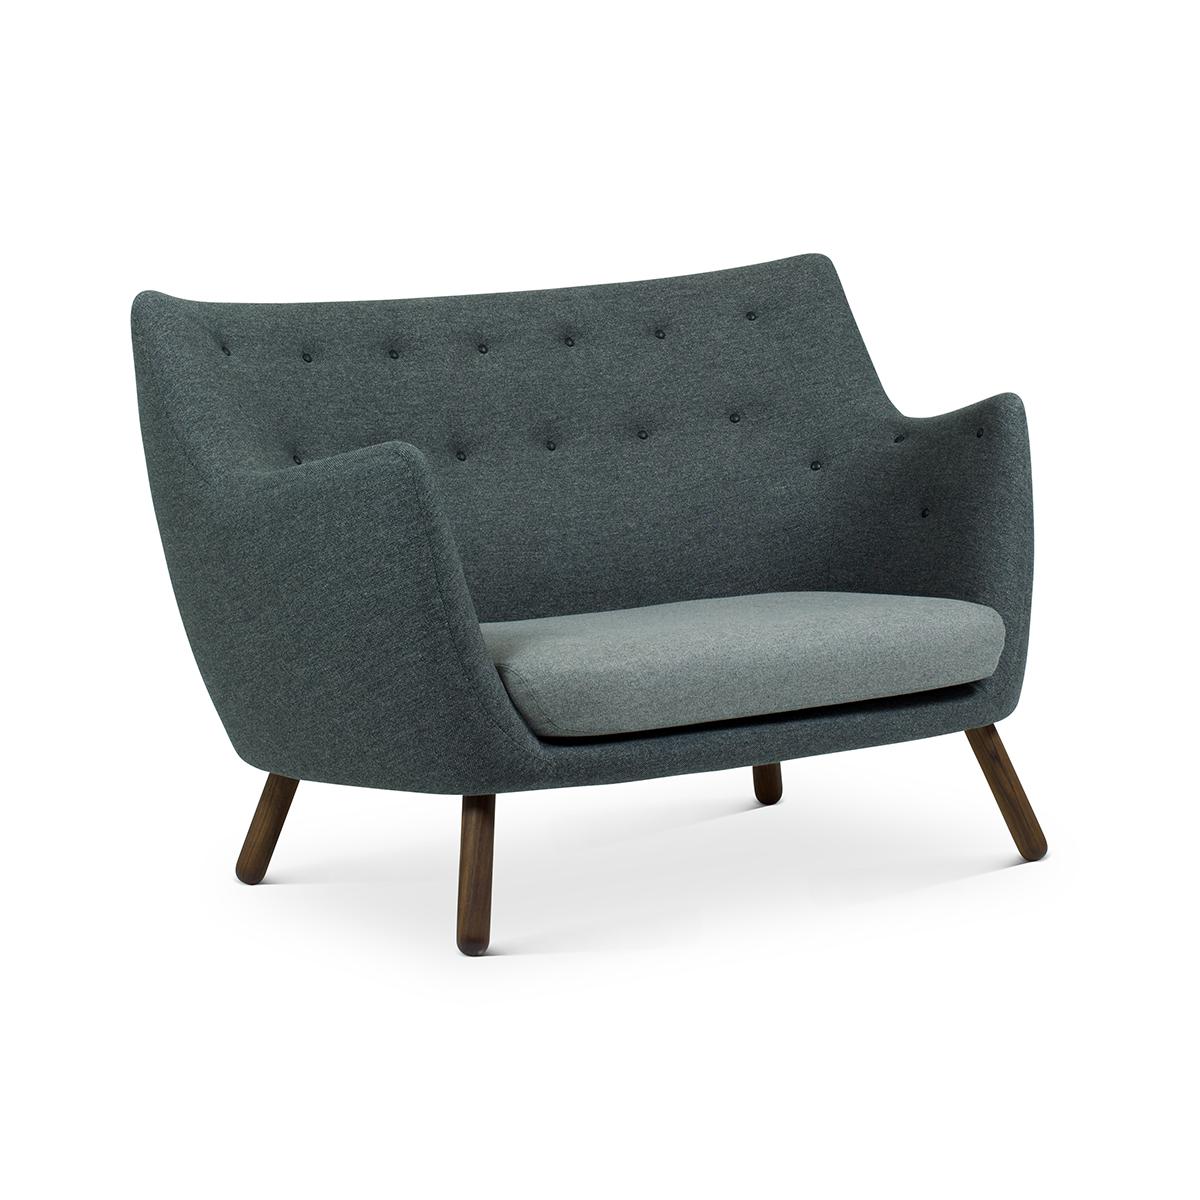 Sofa designed by Finn Juhl in 1946, relaunched in 2008.
Manufactured by House of Finn Juhl in Denmark.

This small two-seat sofa first saw the light of day at the Copenhagen Cabinetmakers’ Guild Exhibition in 1941. It should be seen as a natural